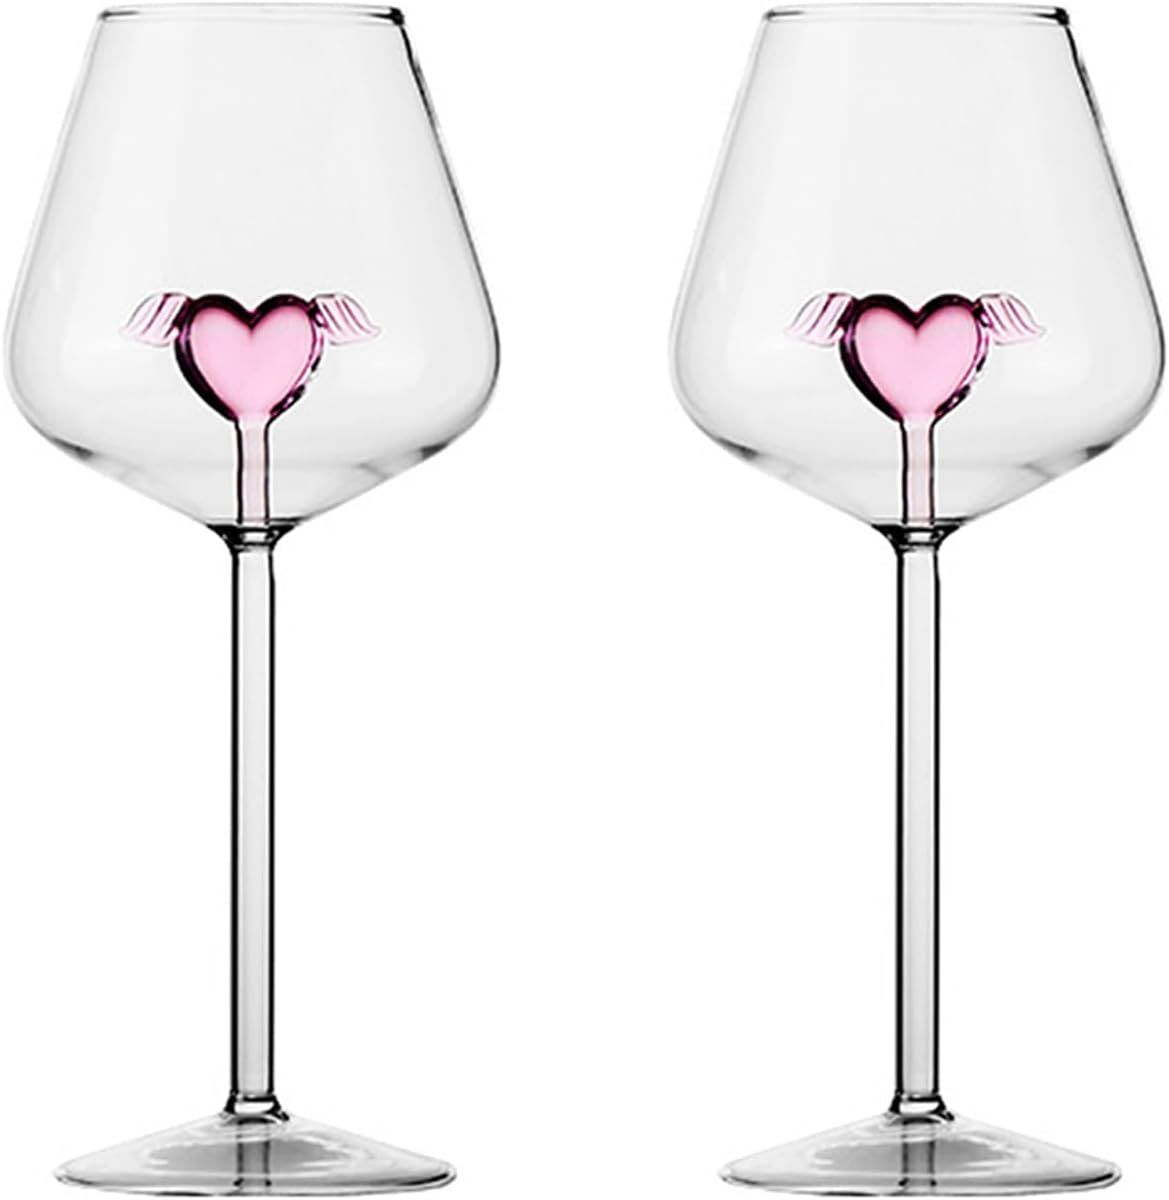 17oz Crystal Red Wine Glasses set of 2 Romantic Heart Shaped Wine Glasses Creative Cocktail Drink... | Amazon (US)